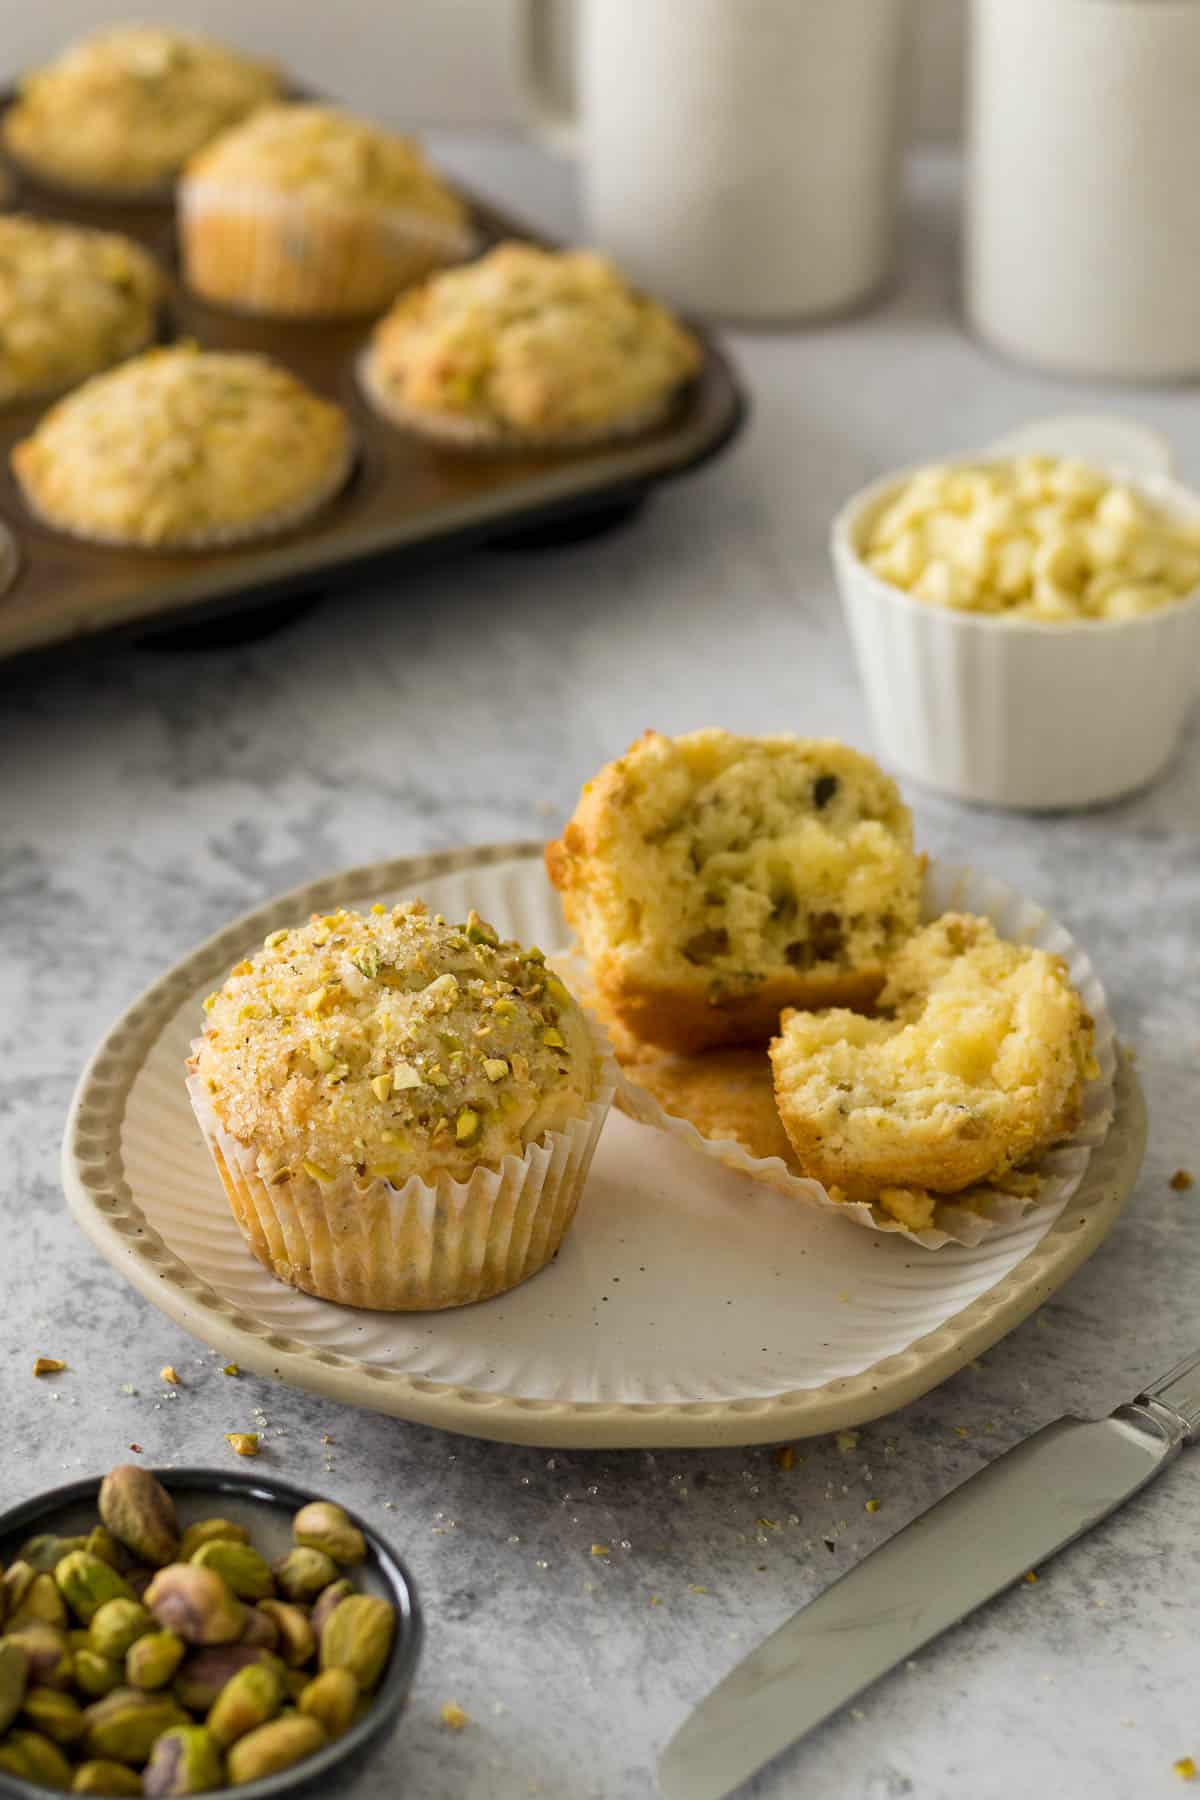 Pistachio muffins on a plate.